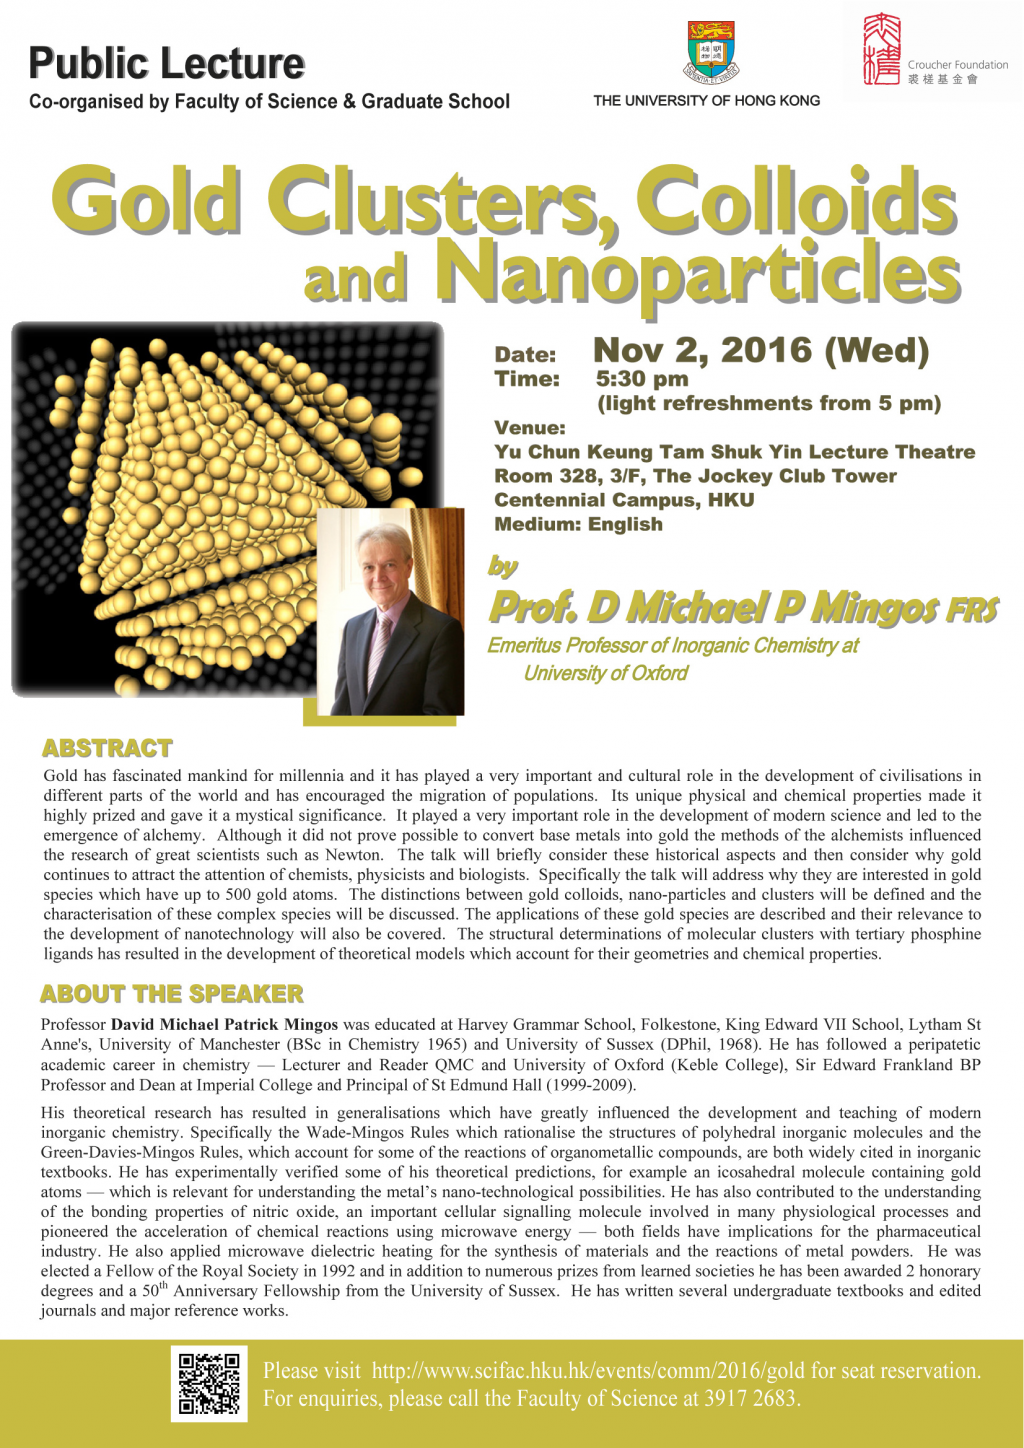 Public Lecture co-organised by Faculty of Science & Graduate School: Gold Clusters, Colloids and Nanoparticles